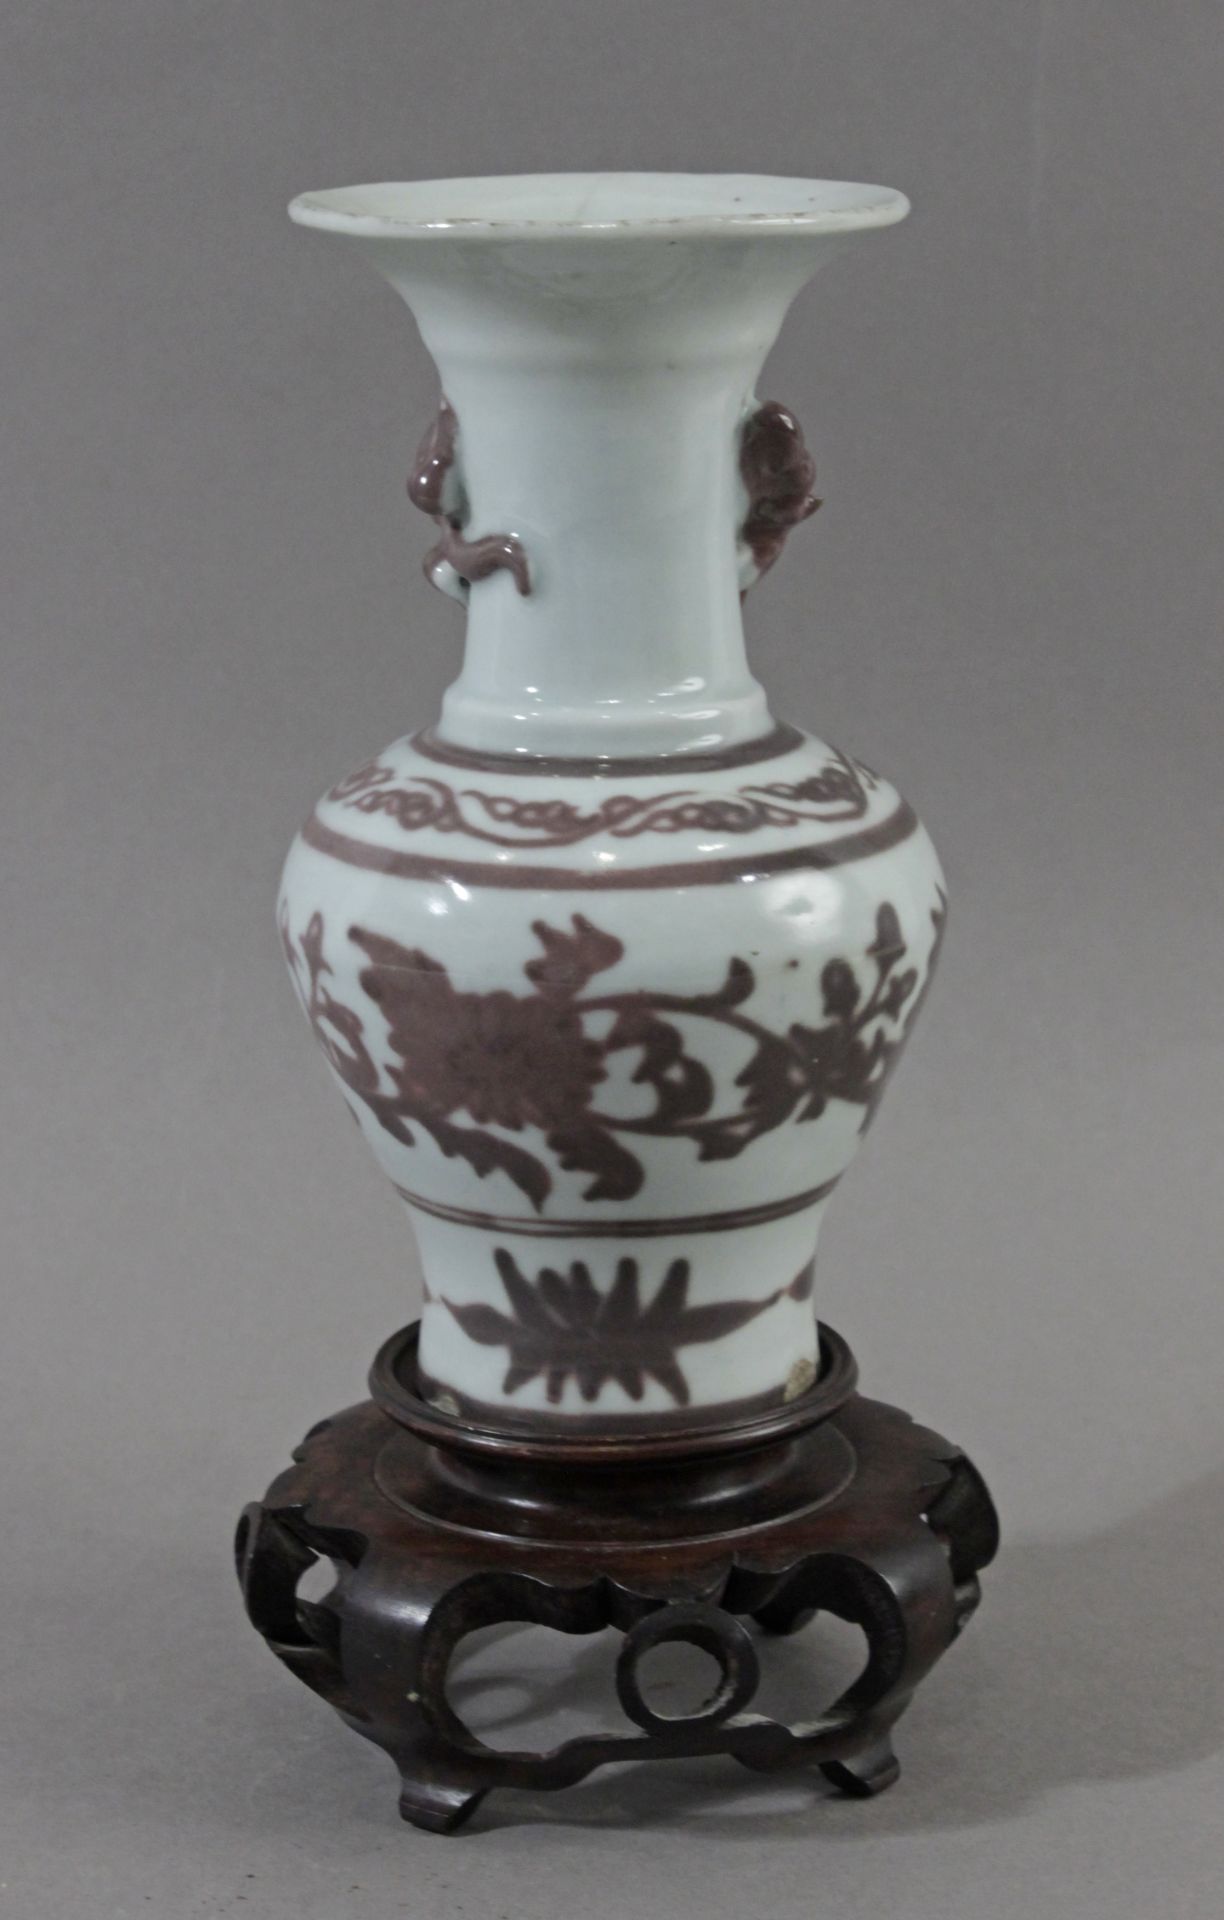 A 20th century Chinese vase from Republic period in celadon porcelain - Image 4 of 7